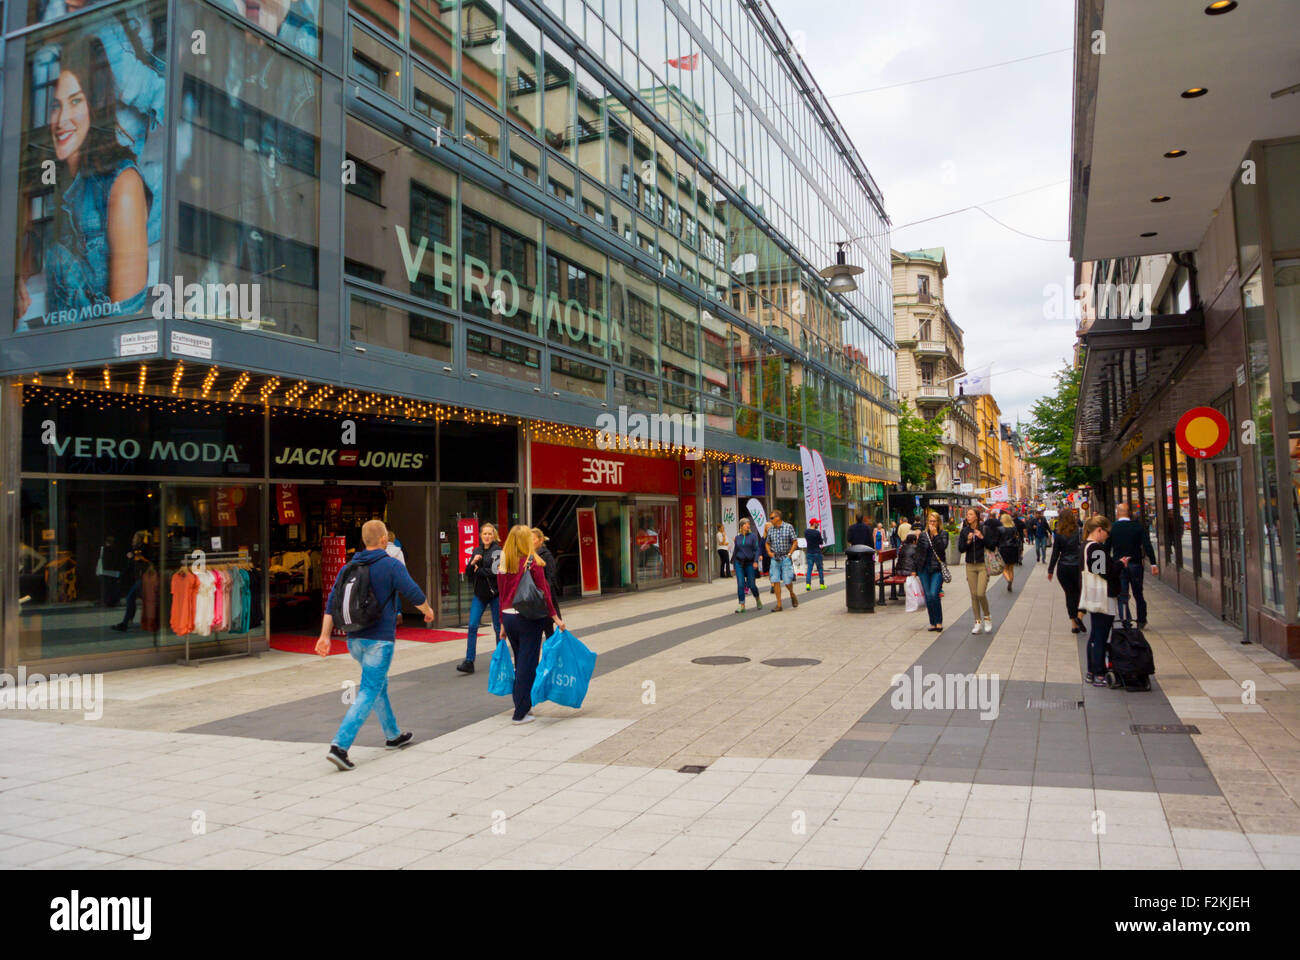 Swedish Shops High Resolution Stock Photography and Images - Alamy